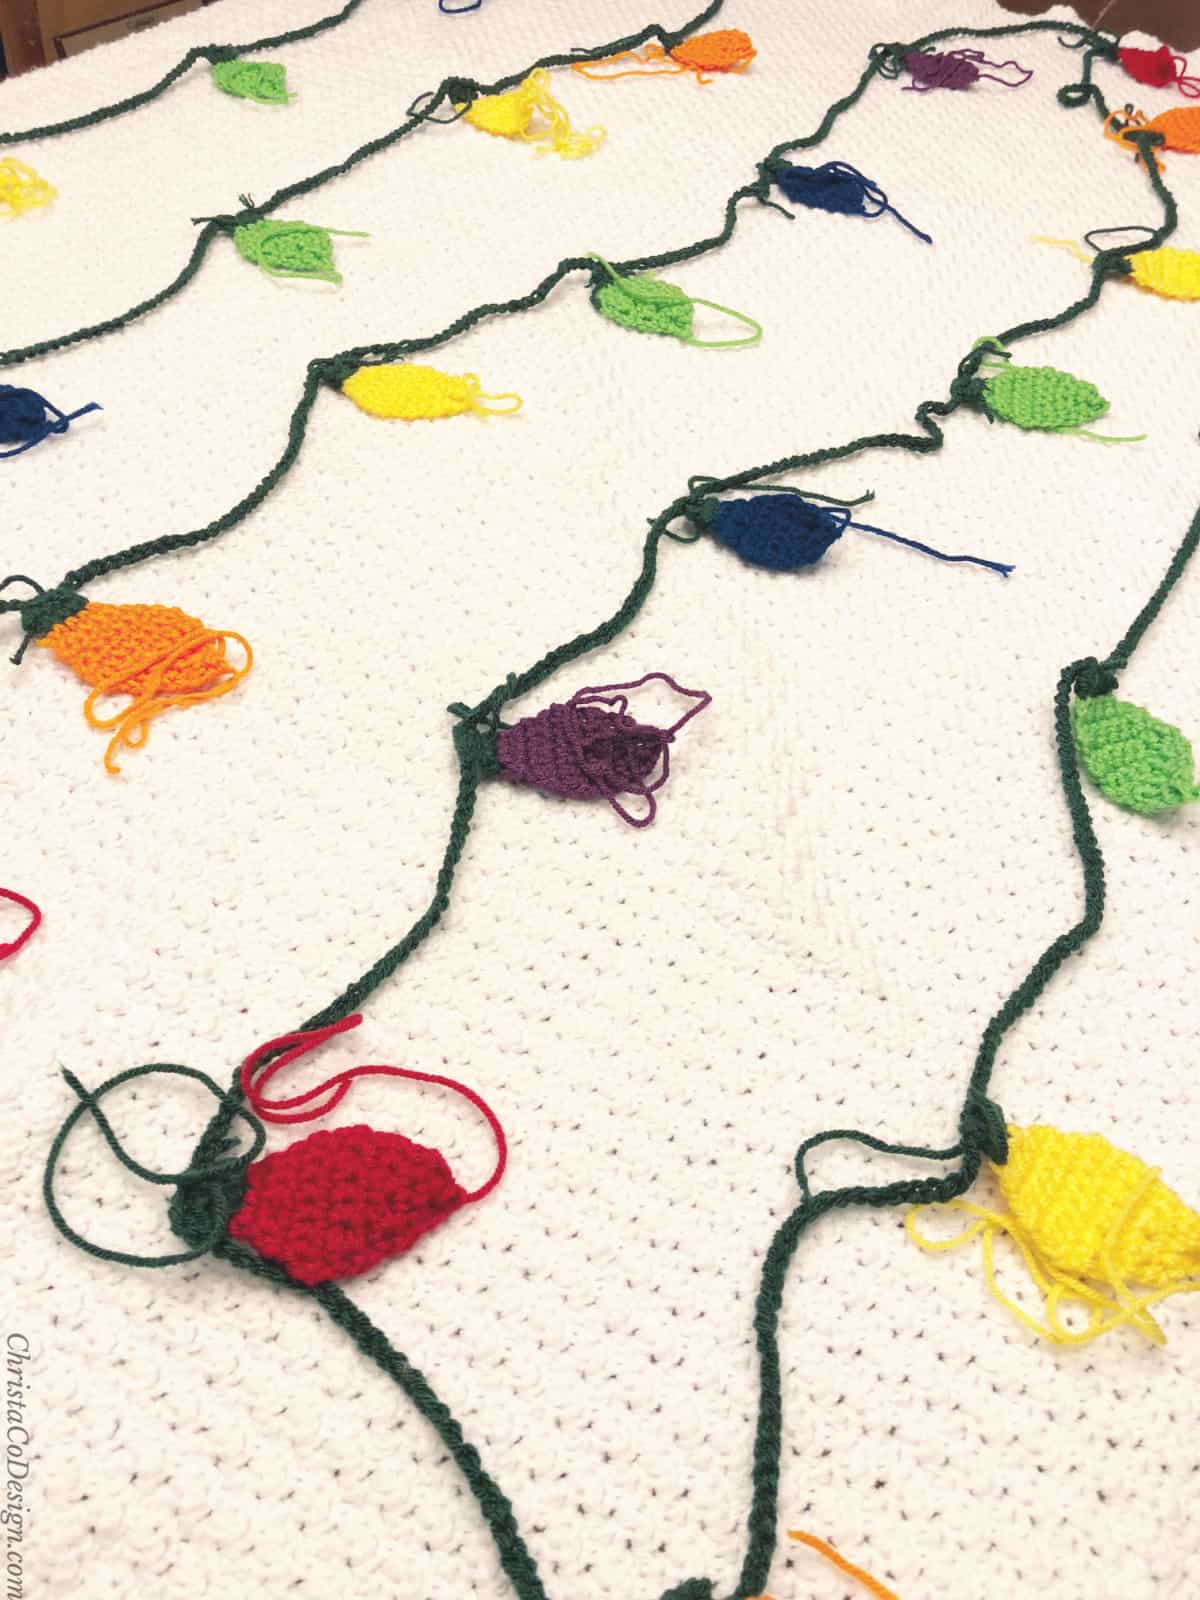 All the crochet Christmas lights laid out on white crochet blanket.